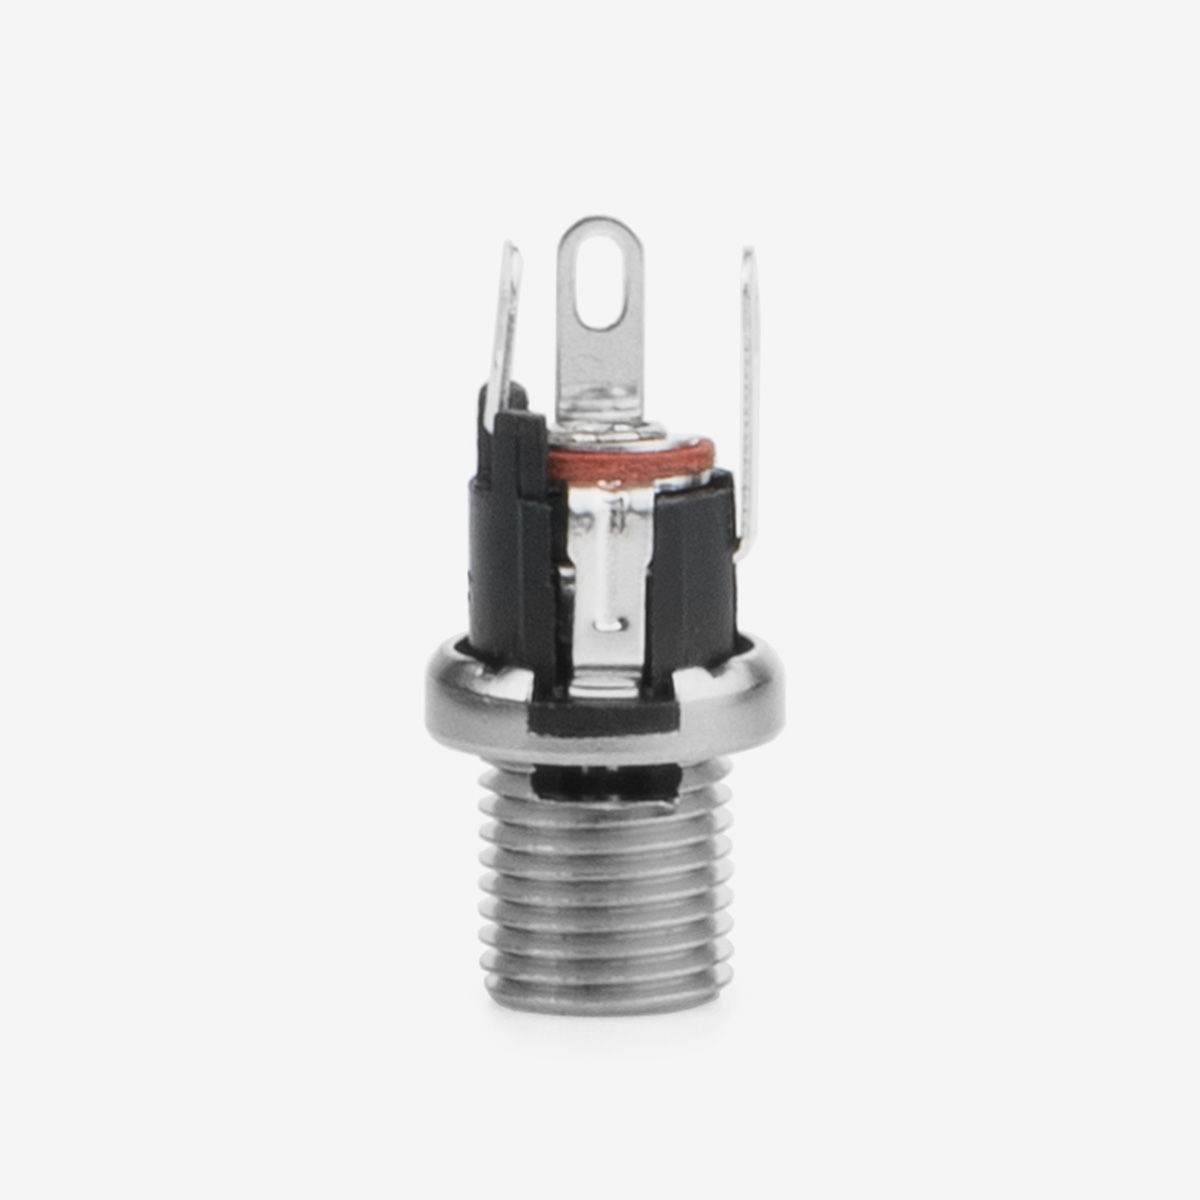 Silver and black DC Powerjack long connector on white background